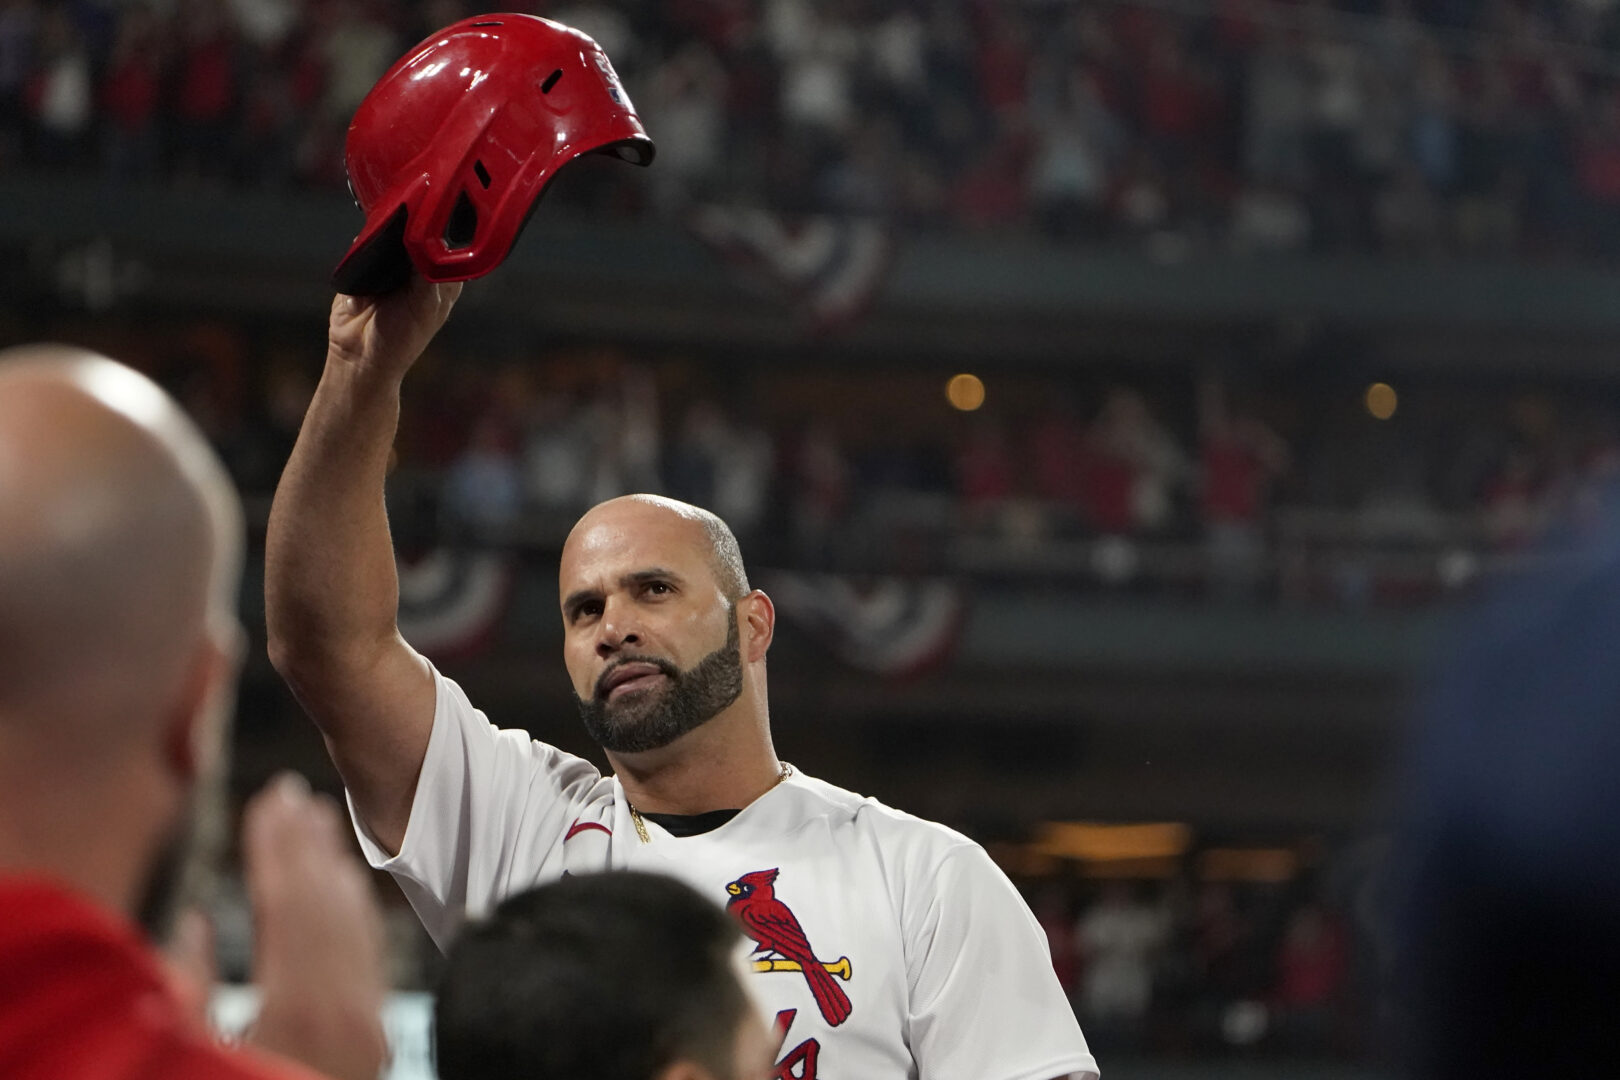 St. Louis Cardinals' Albert Pujols tips his cap after hitting a solo home run during the fourth inning of a baseball game against the Pittsburgh Pirates Friday, Sept. 30, 2022, in St. Louis. (AP Photo/Jeff Roberson)